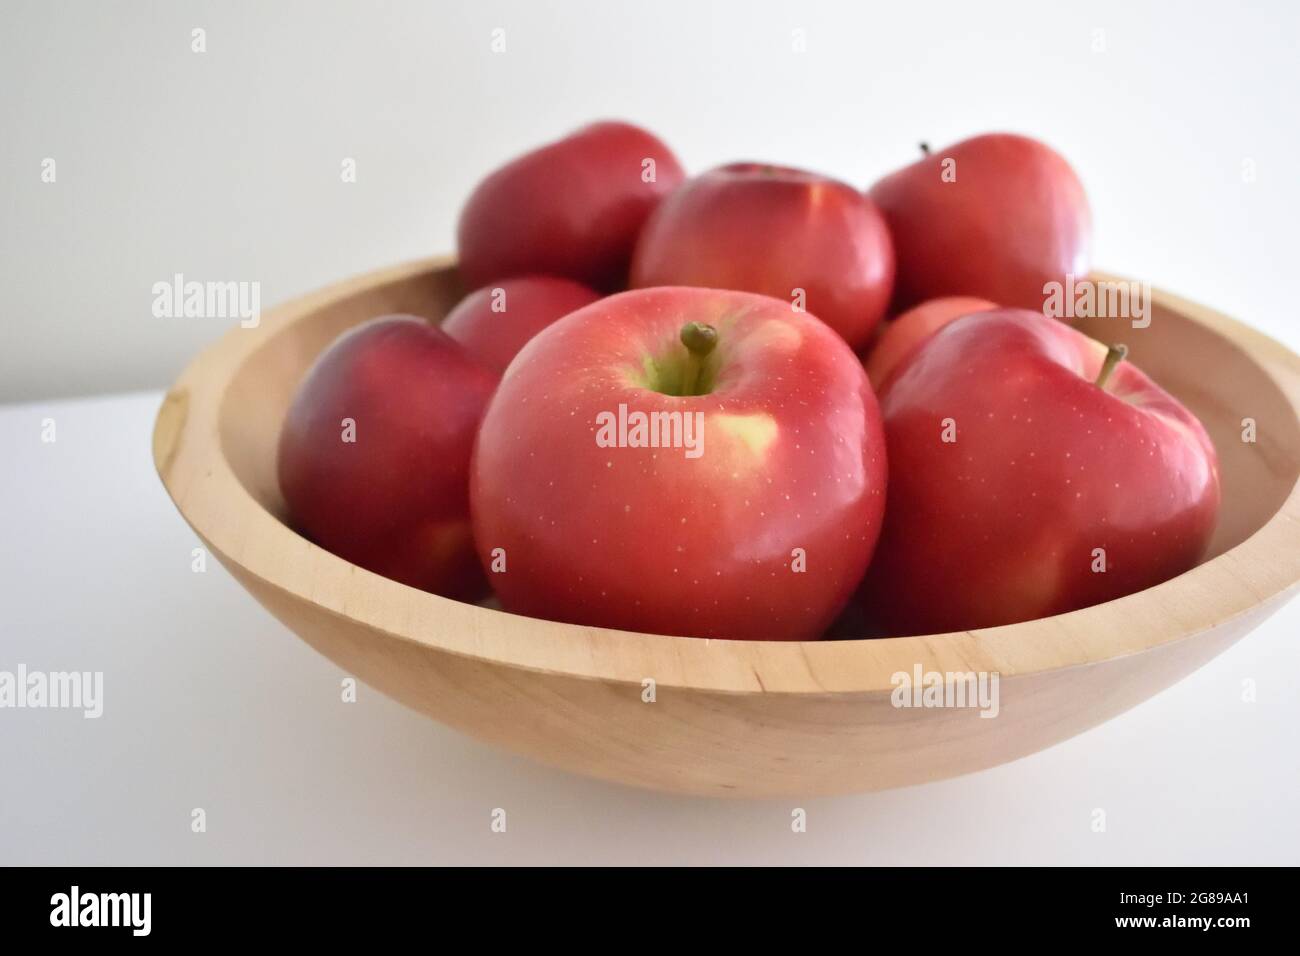 Red apples in a wooden bowl with gray white background Stock Photo